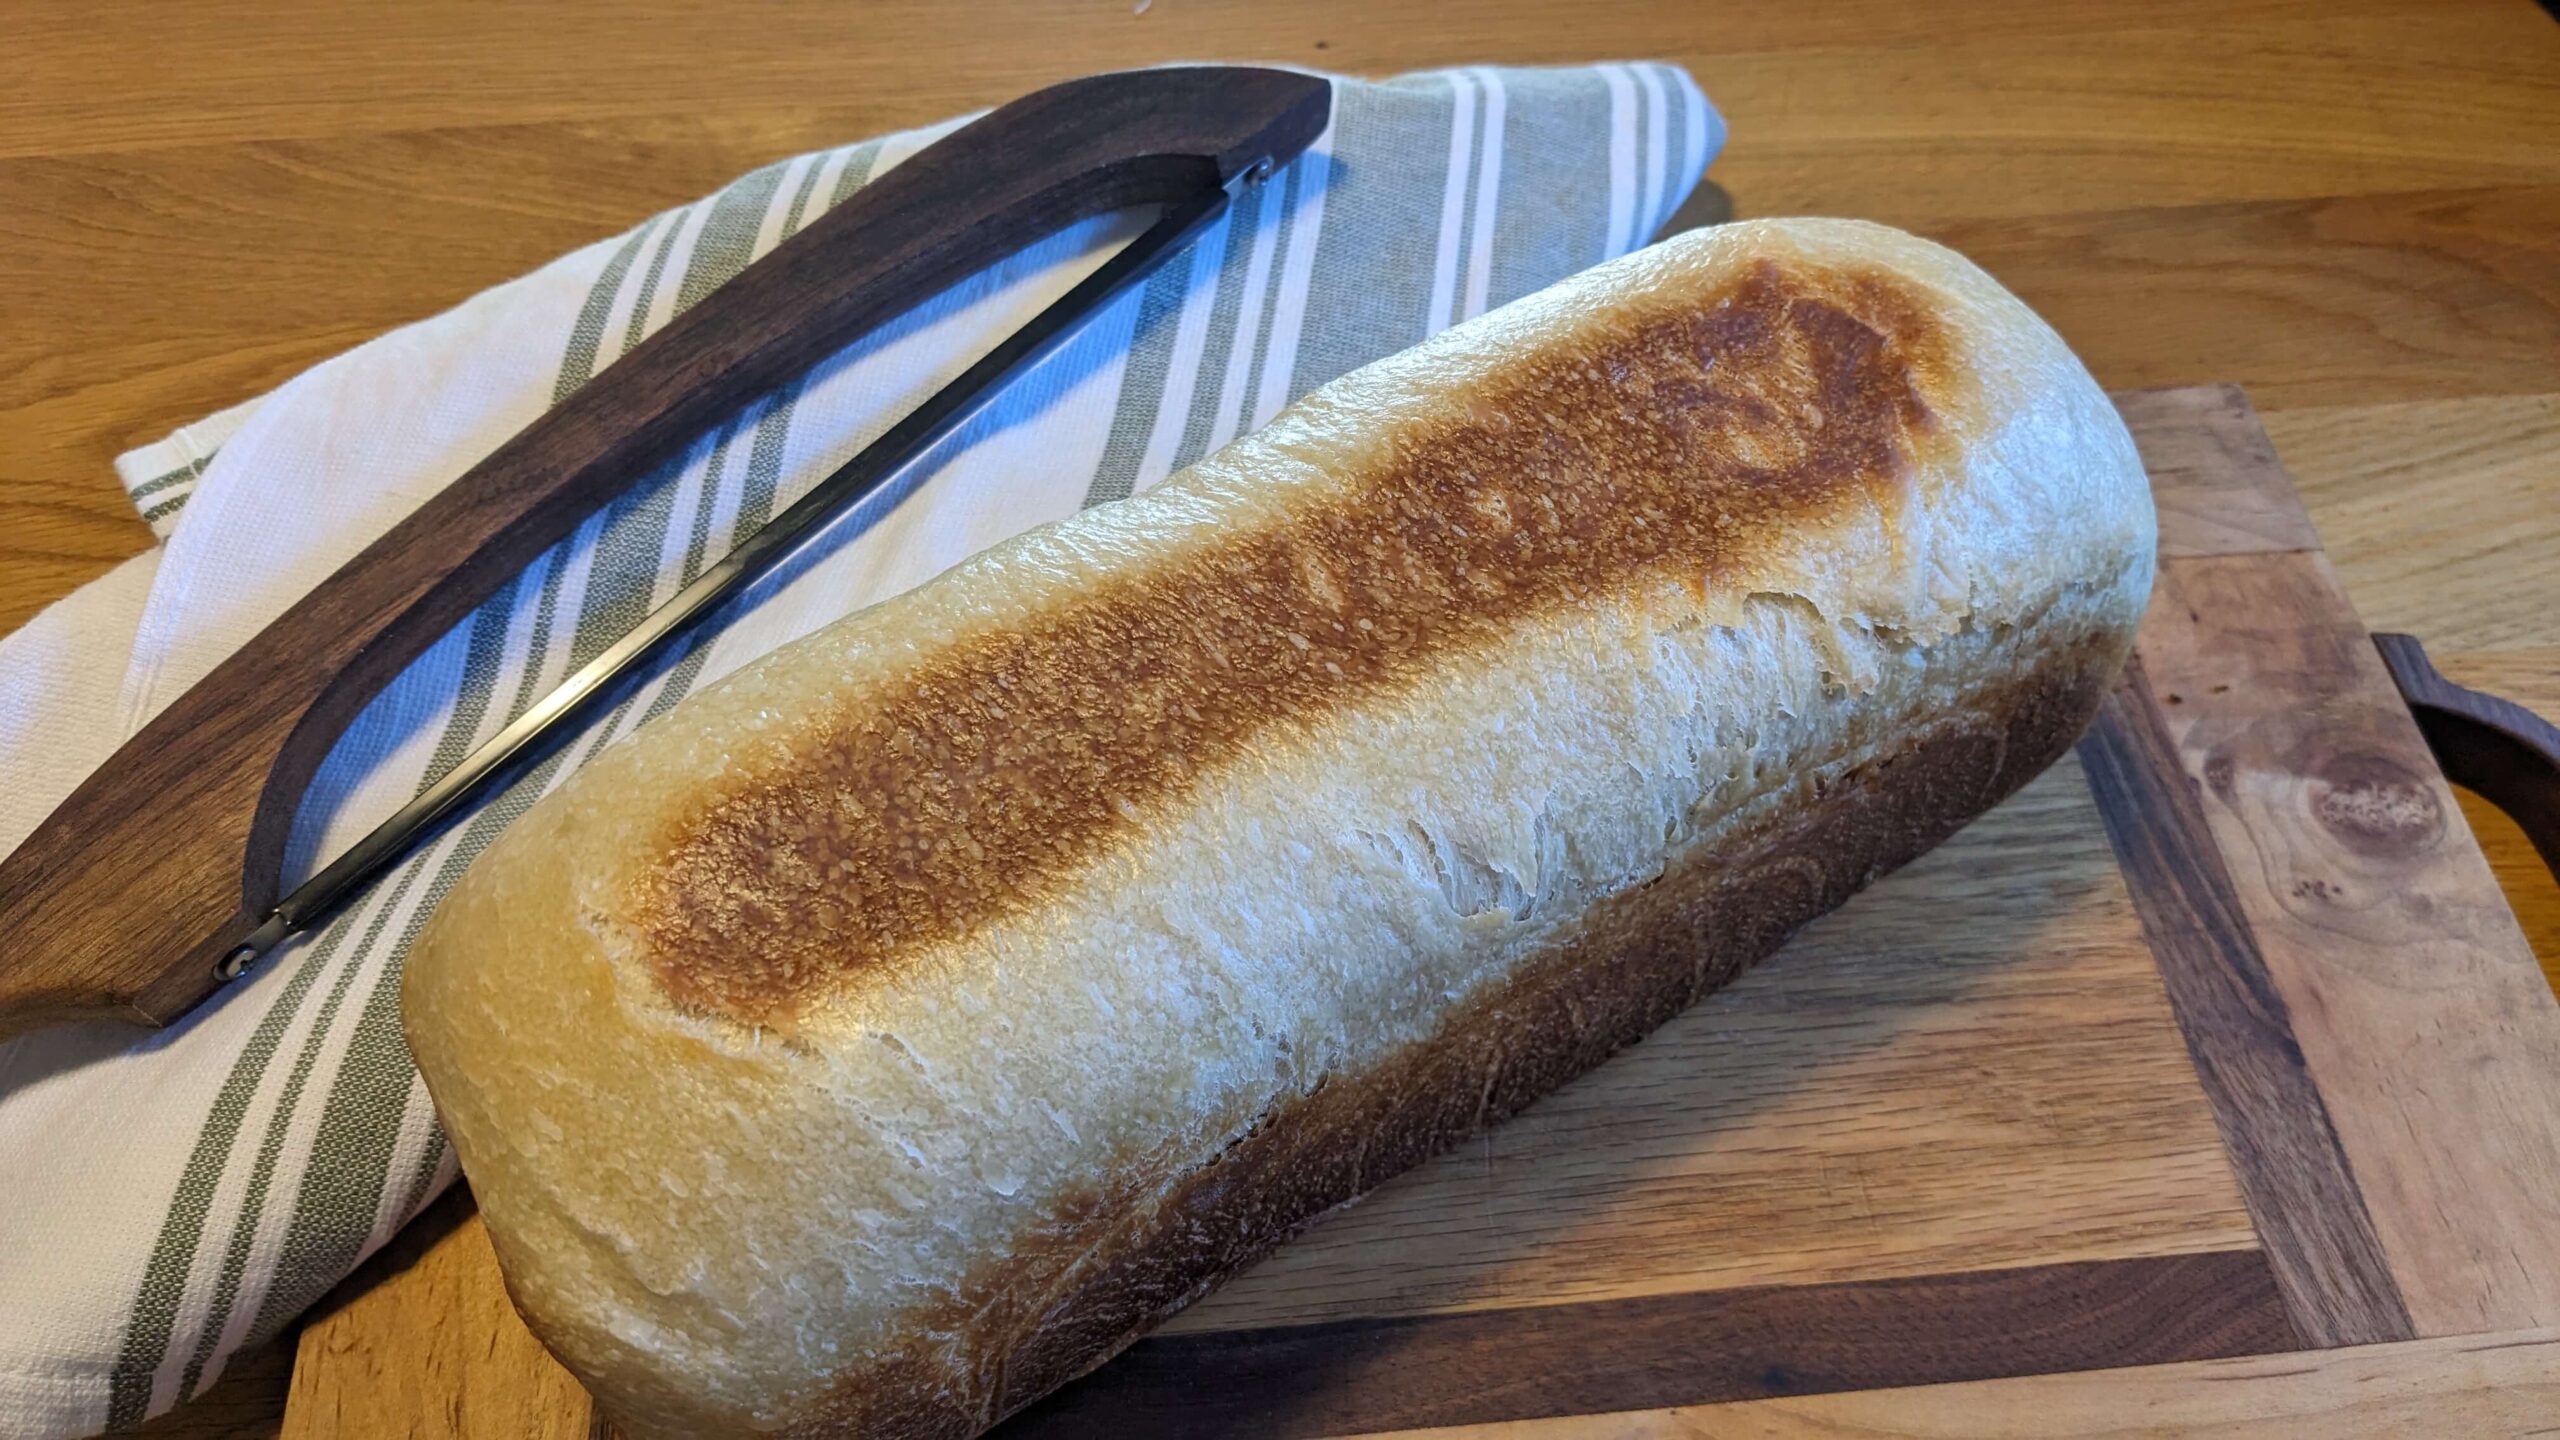 pullman shaped sandwich loaf on a wooden cutting board next to a bow knife on a towel